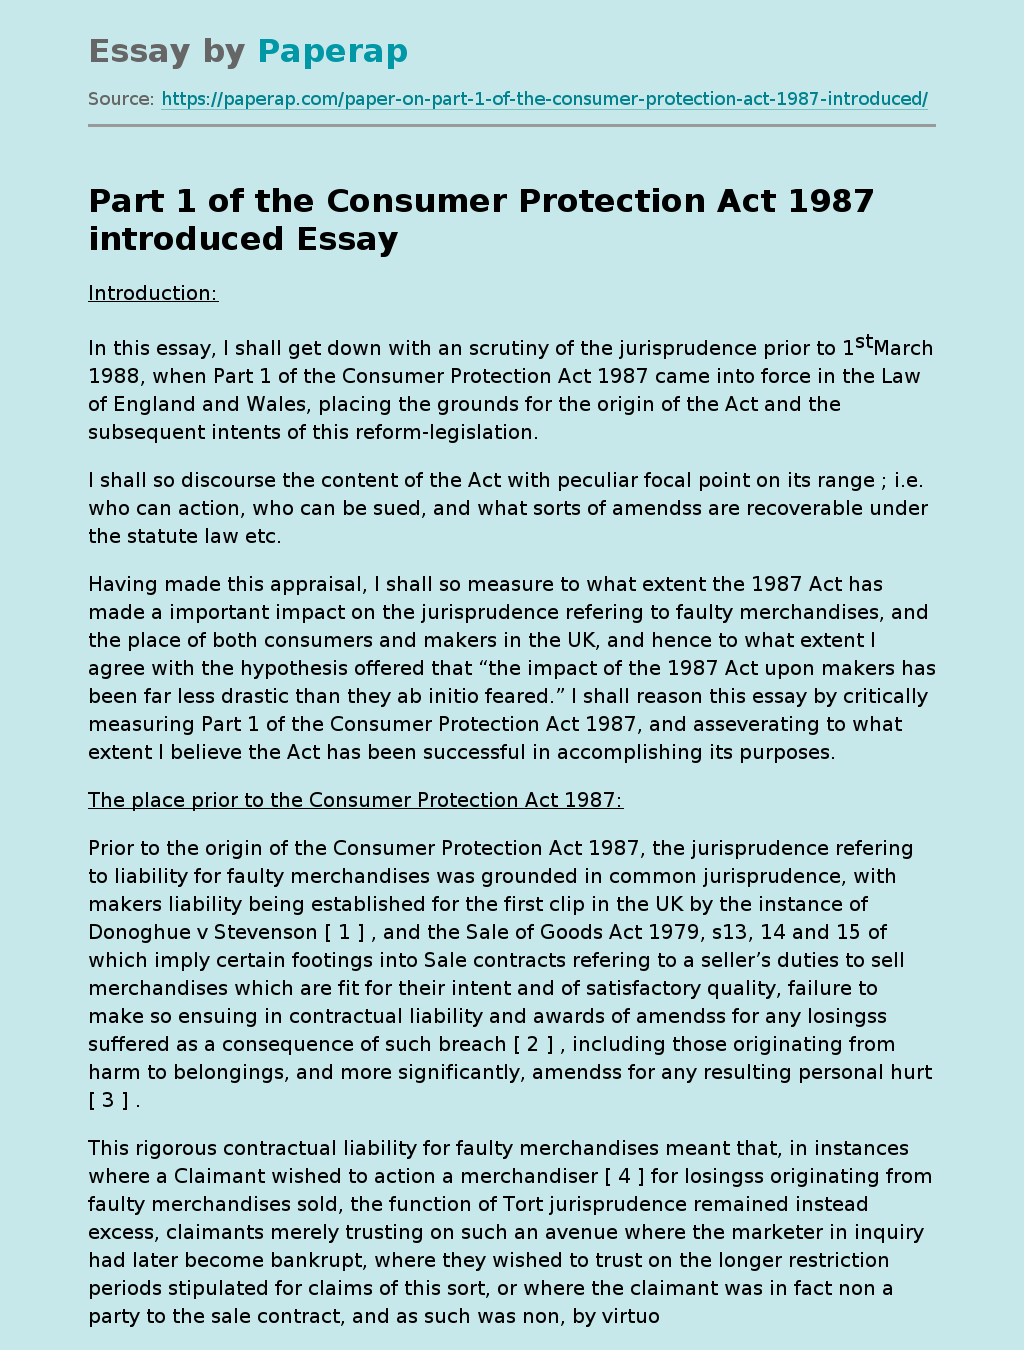 Part 1 of the Consumer Protection Act 1987 introduced